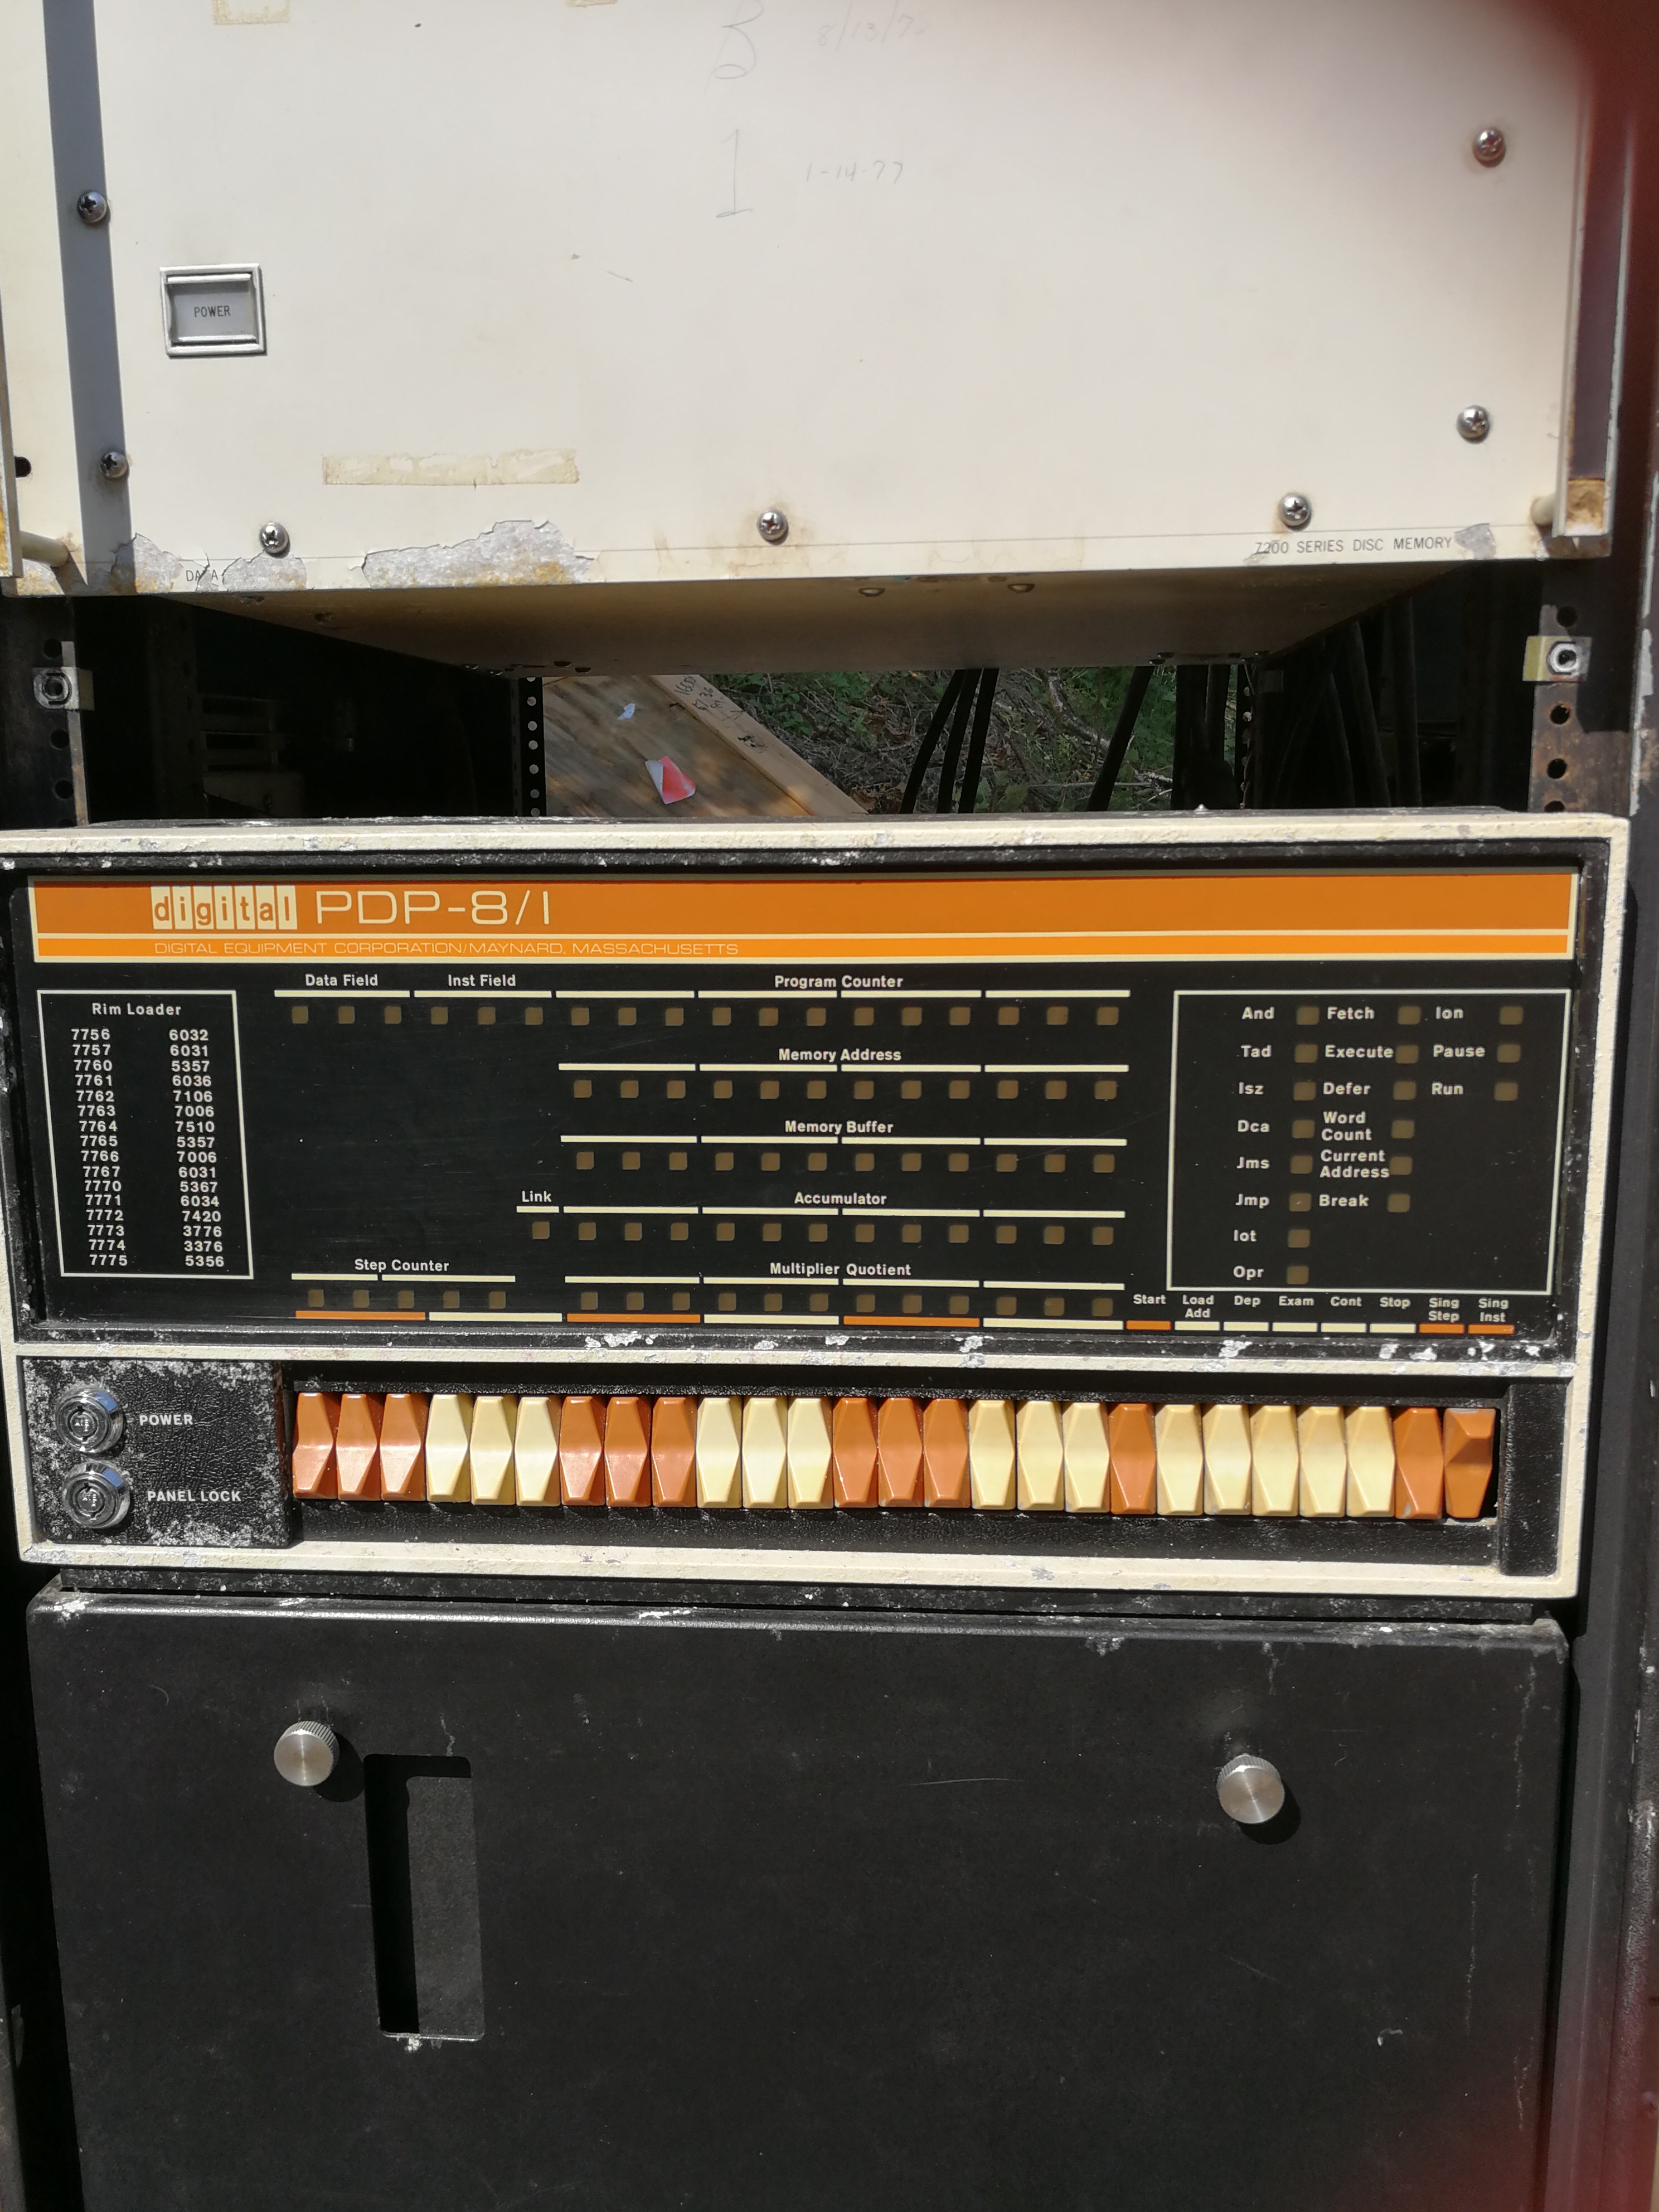 Close up of PDP8 front panel - showing some corrosion